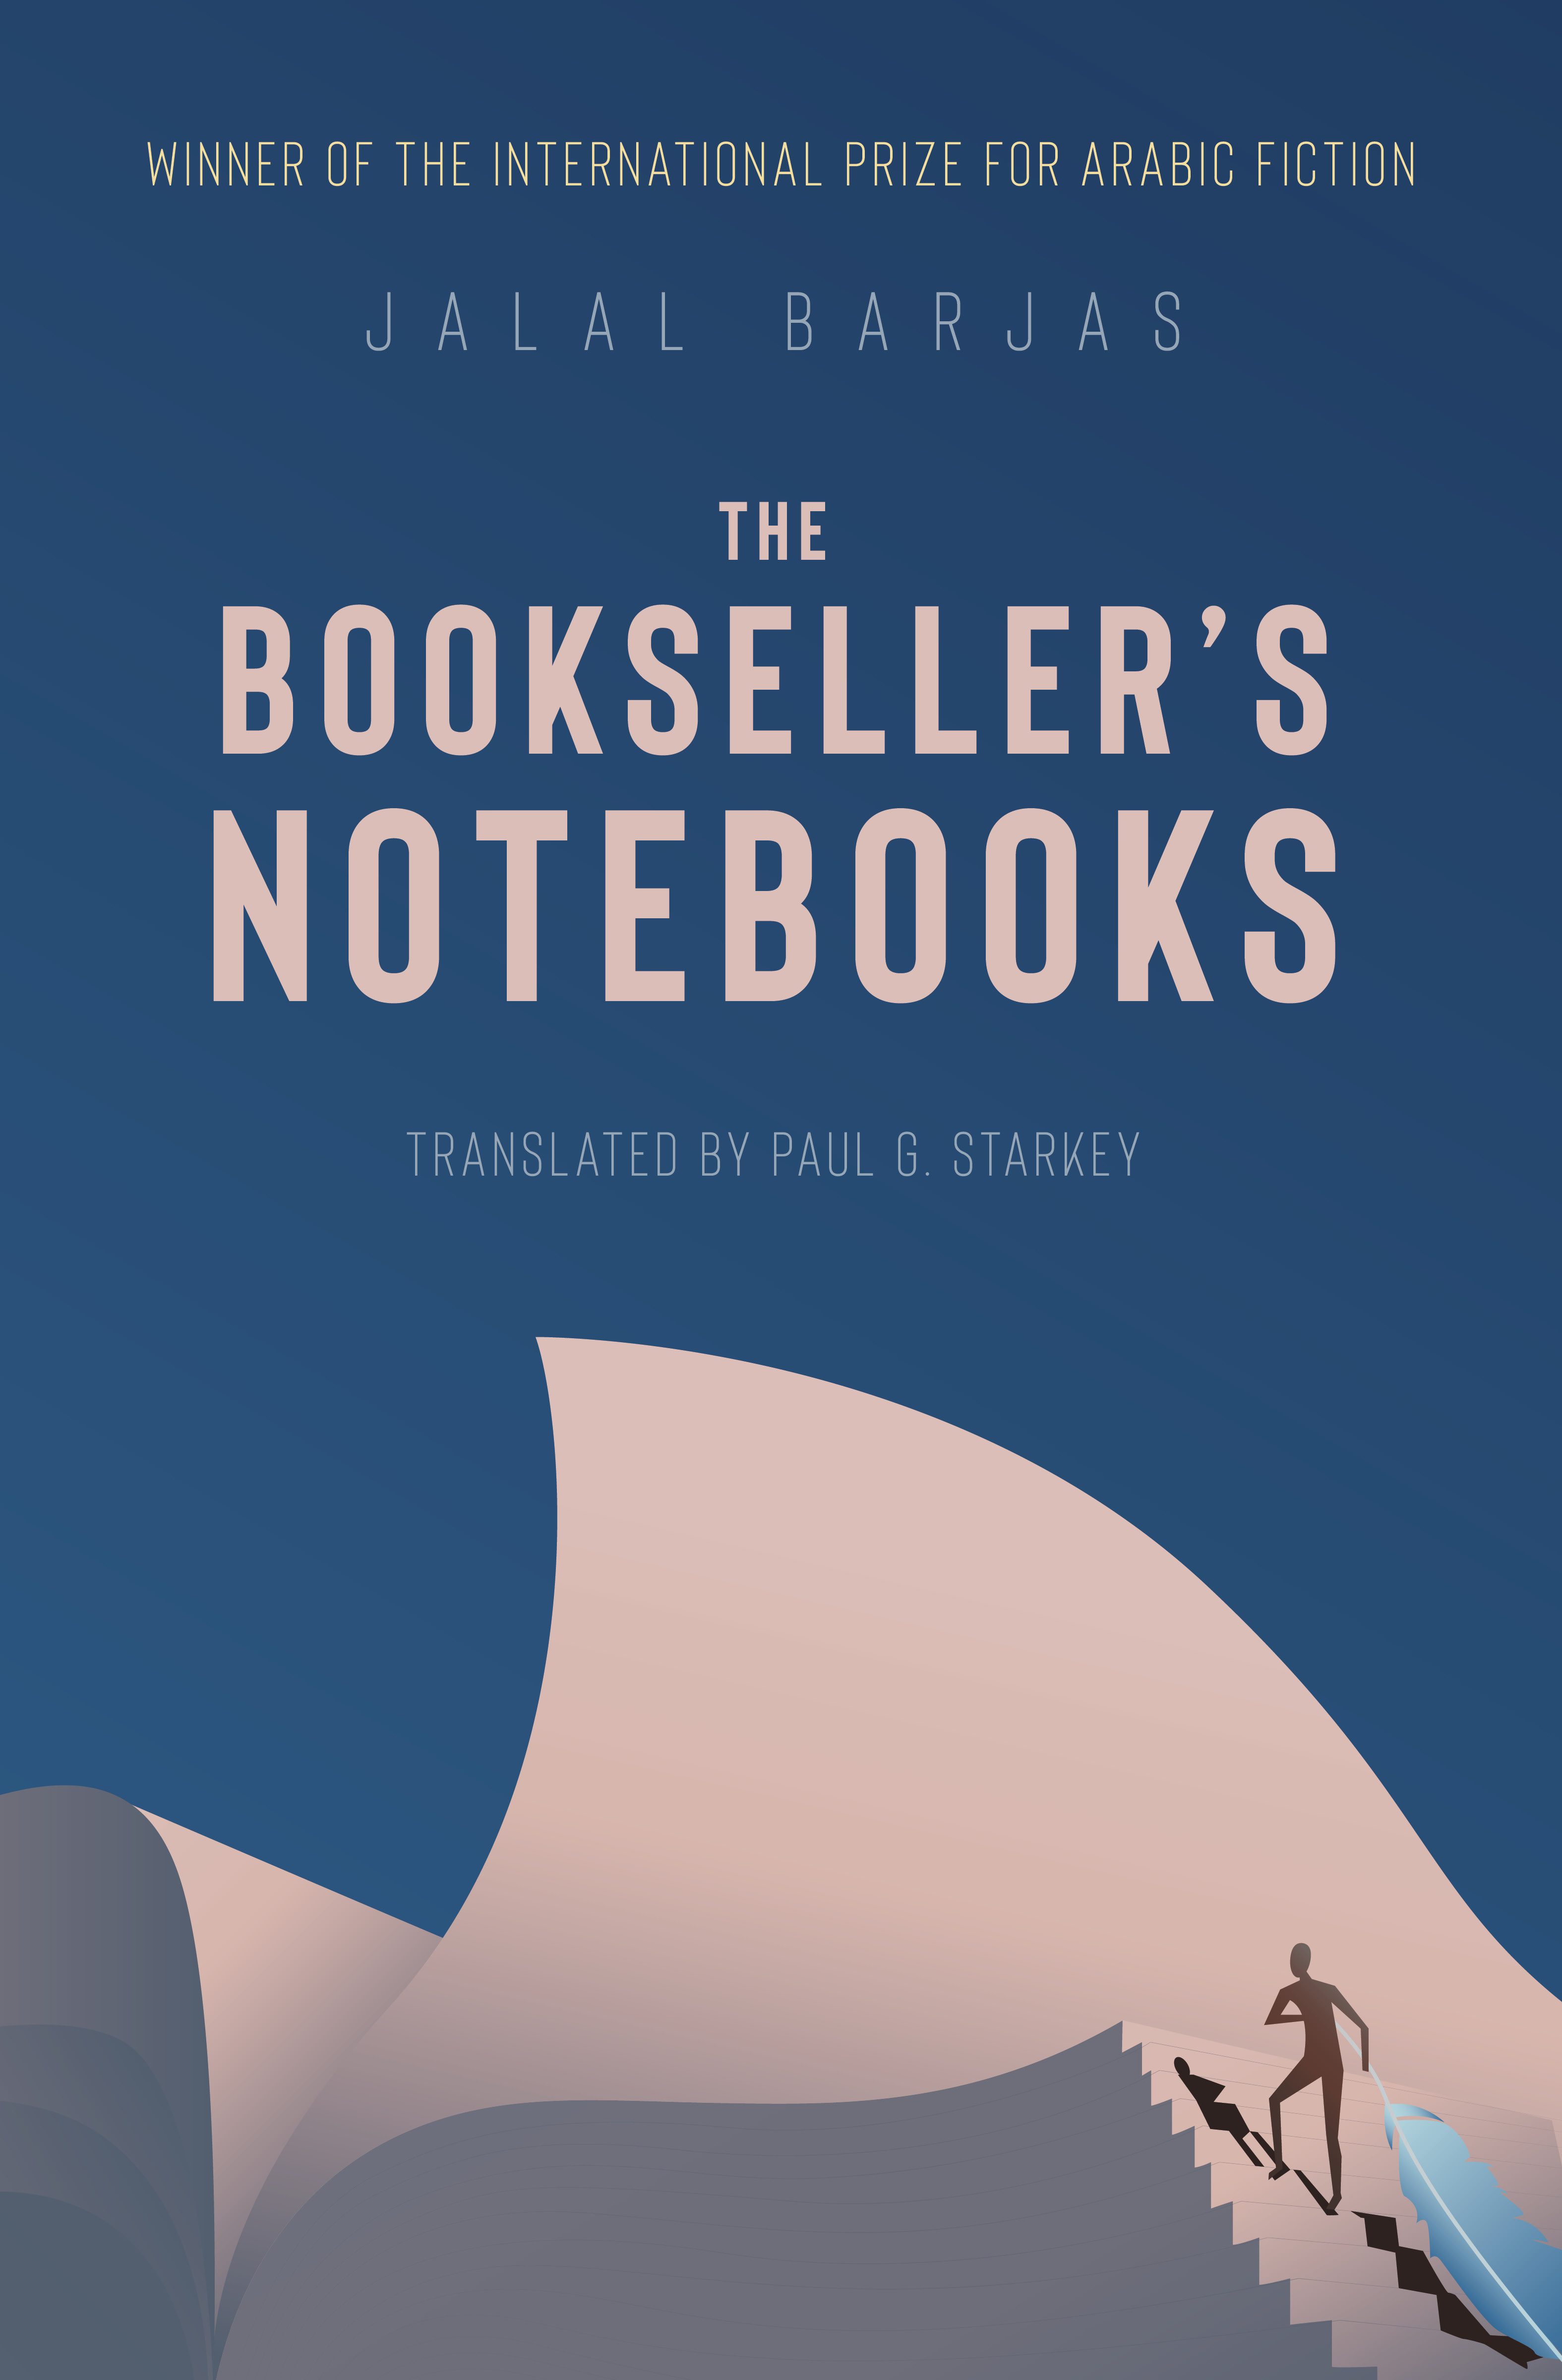 The Booksellerâ€™s Notebooks